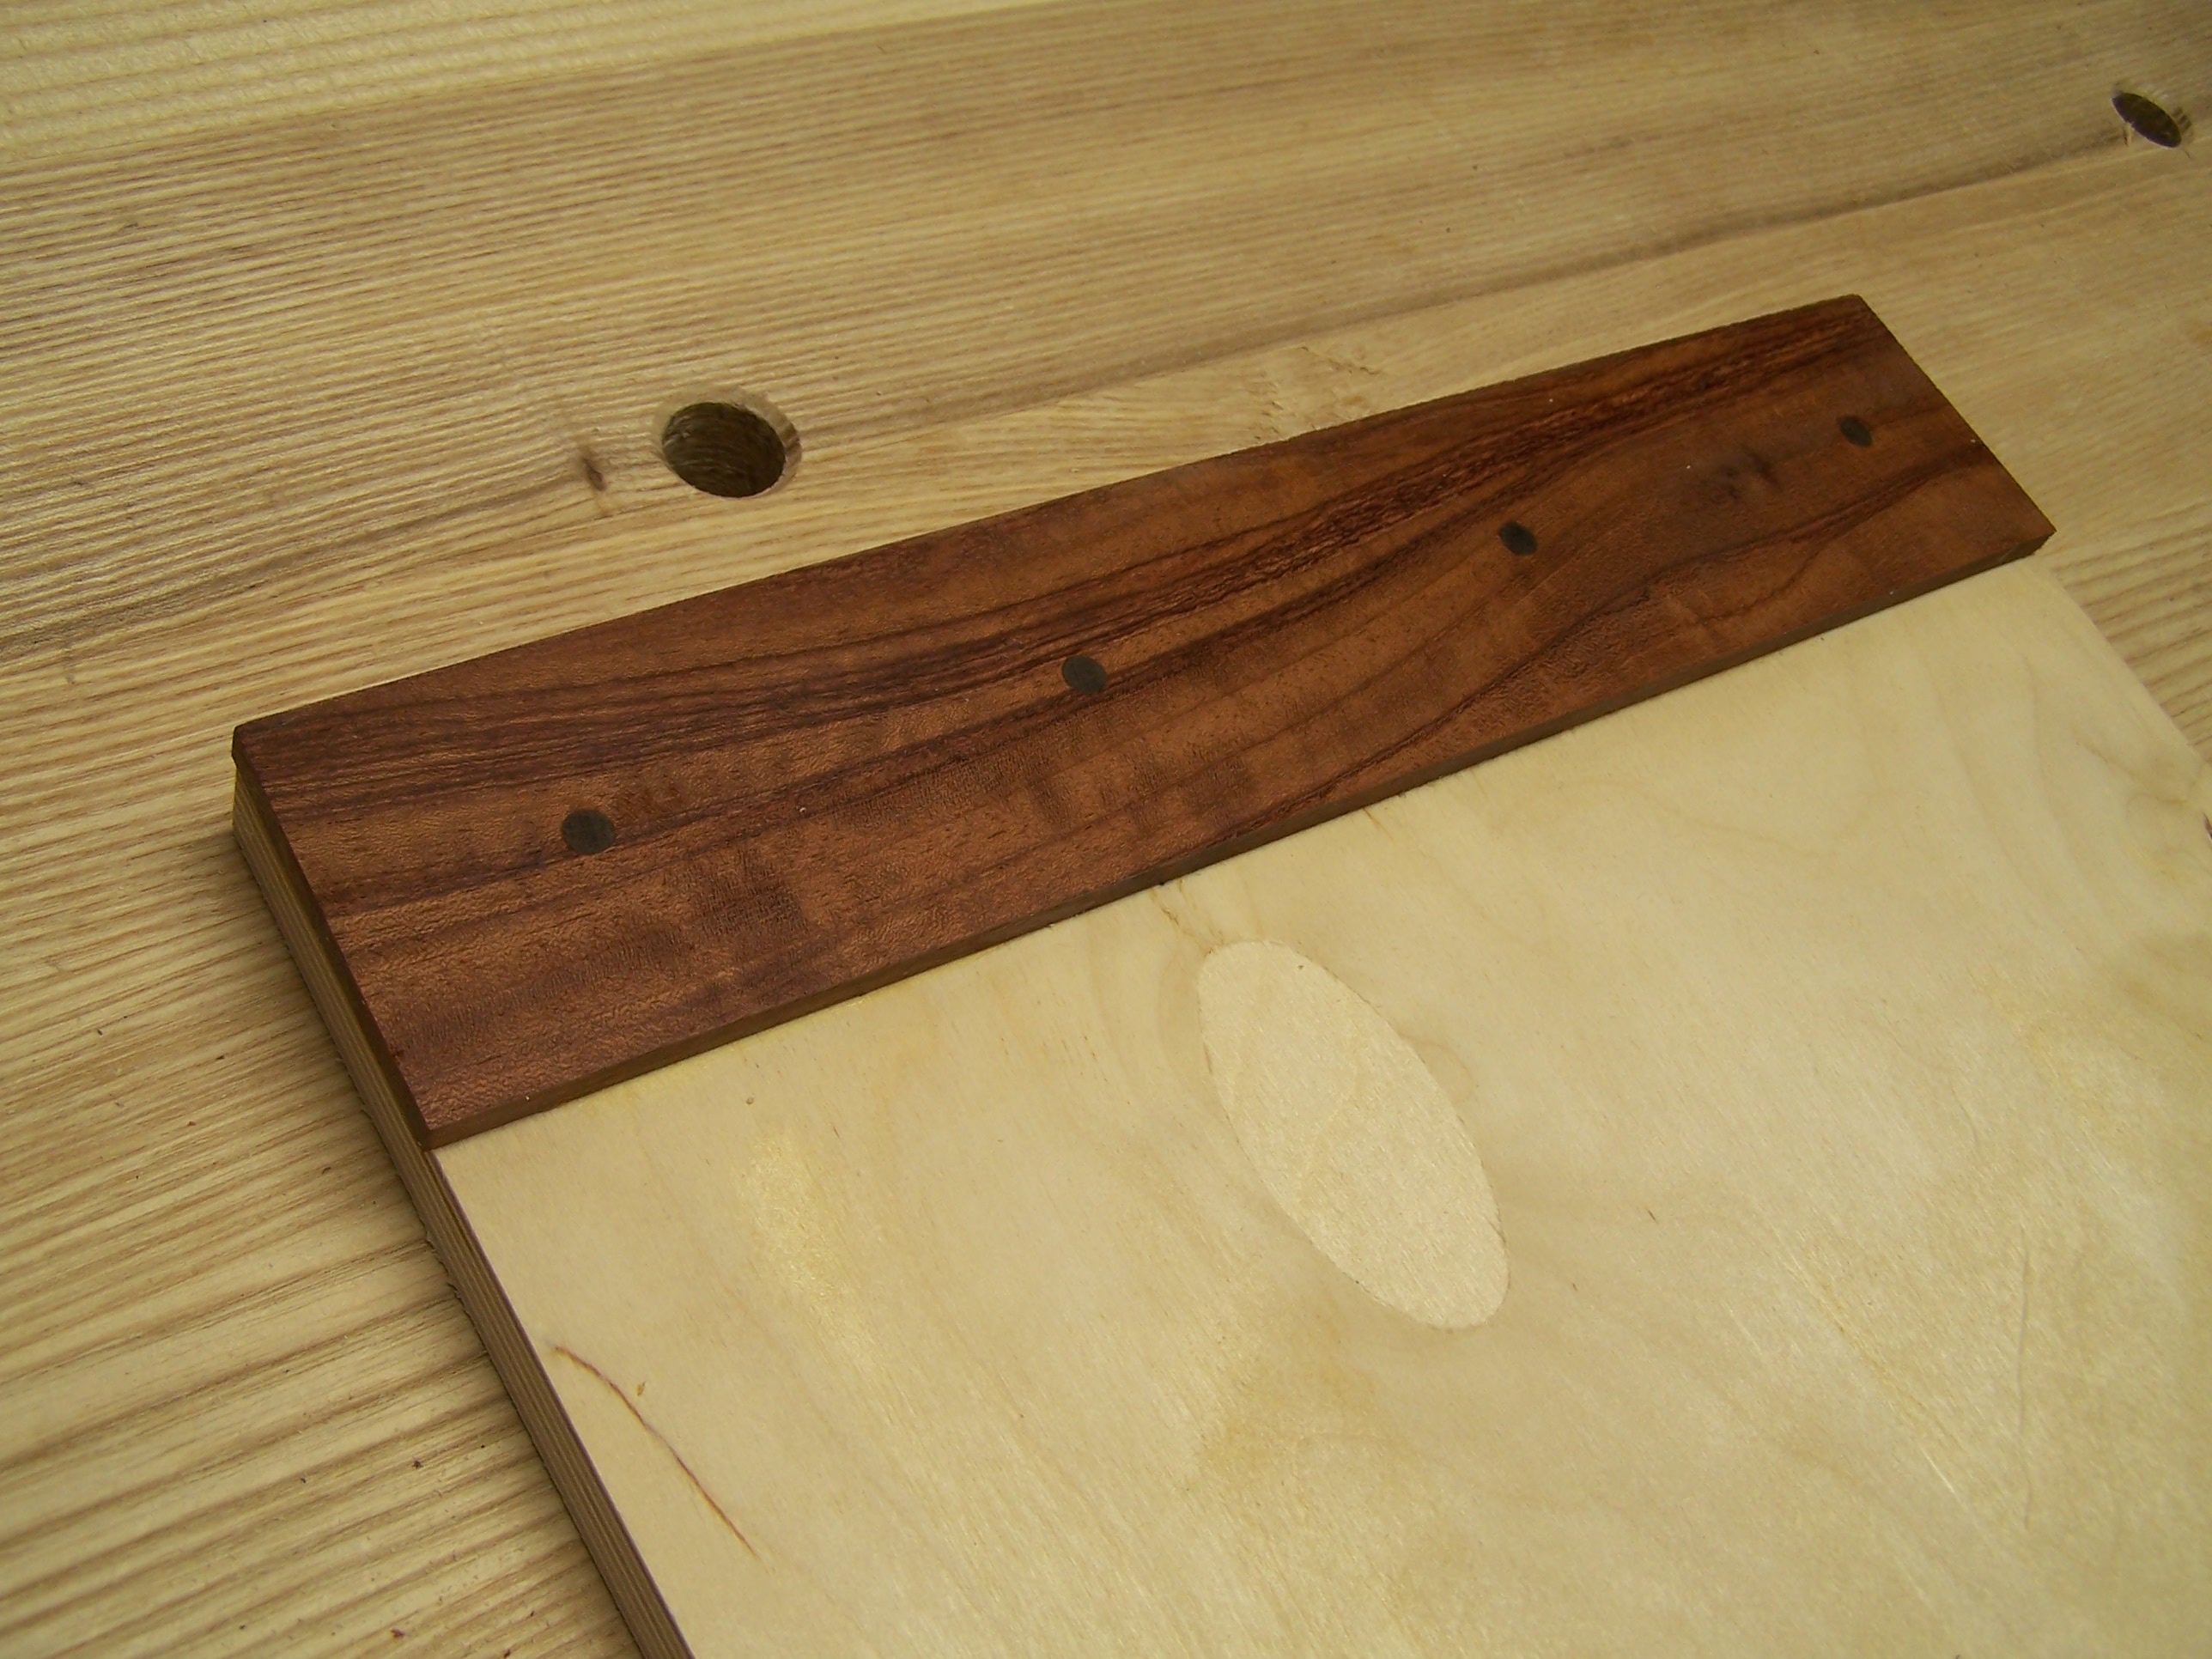  Woodwork Bench Hook Download wooden table saw sled plans  woodproject